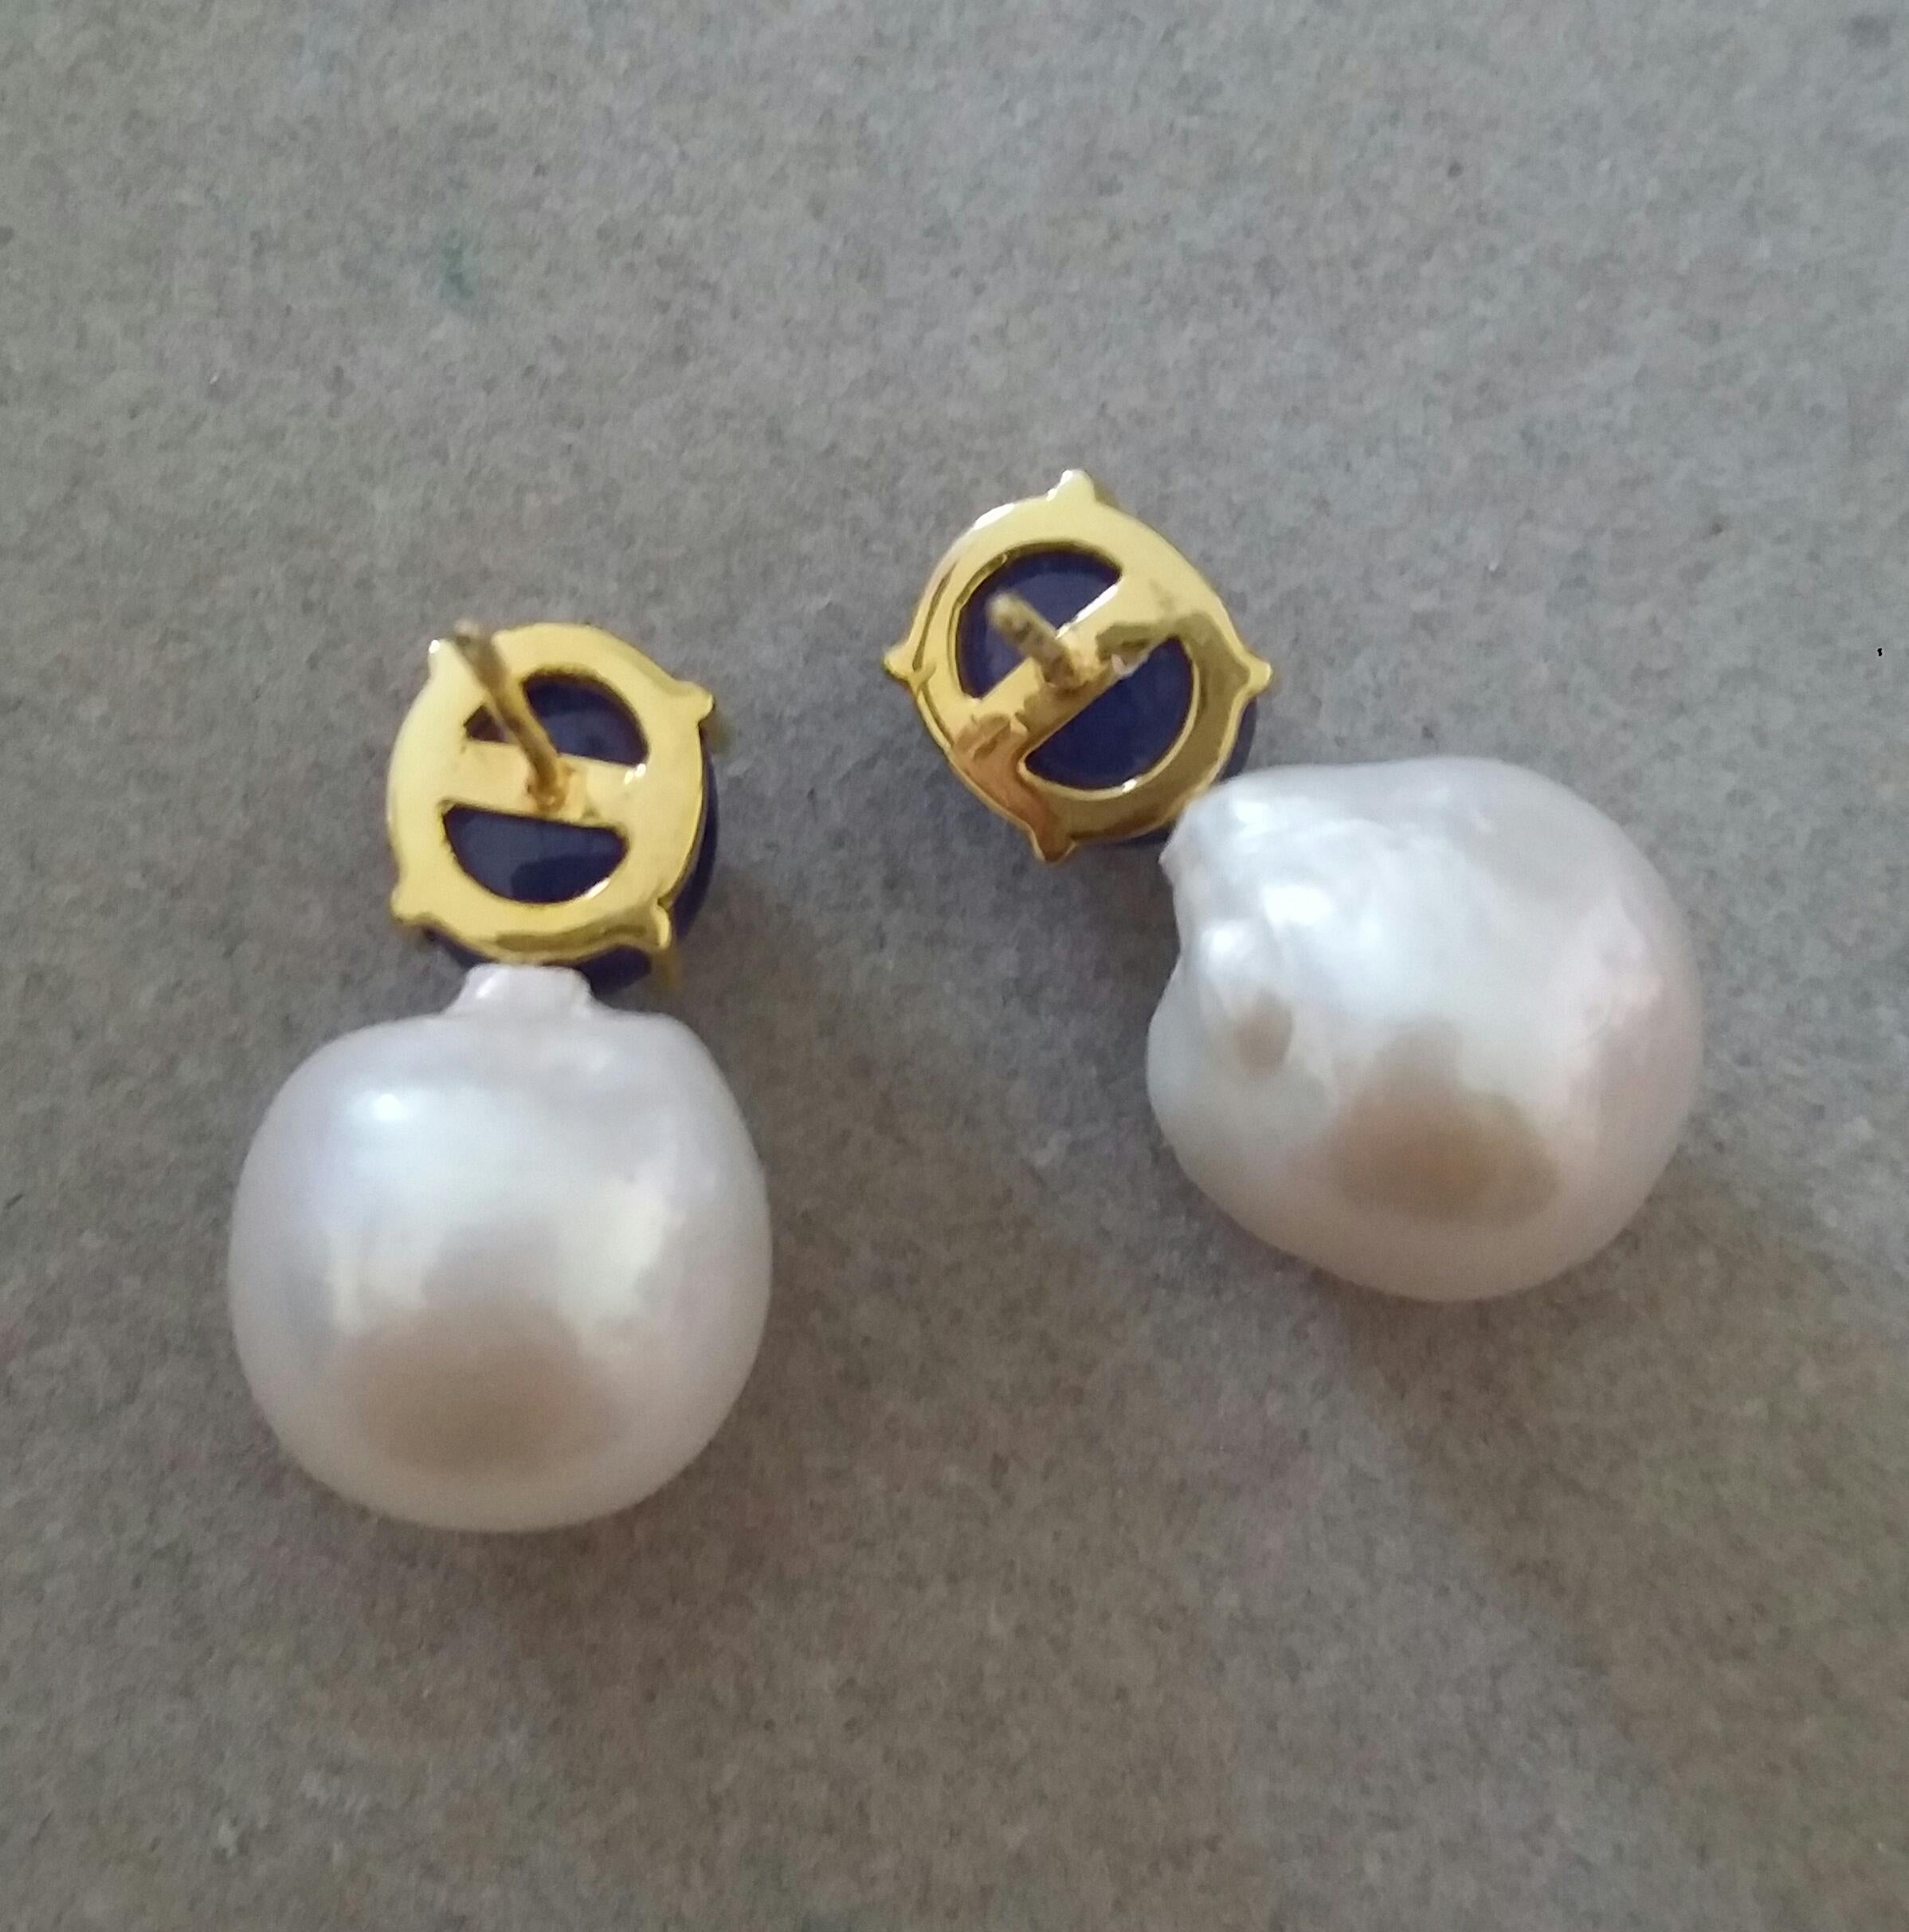 Big Size White Baroque Pearls Oval Blue Sapphires Cabochons Yellow Gold Earrings In Good Condition For Sale In Bangkok, TH